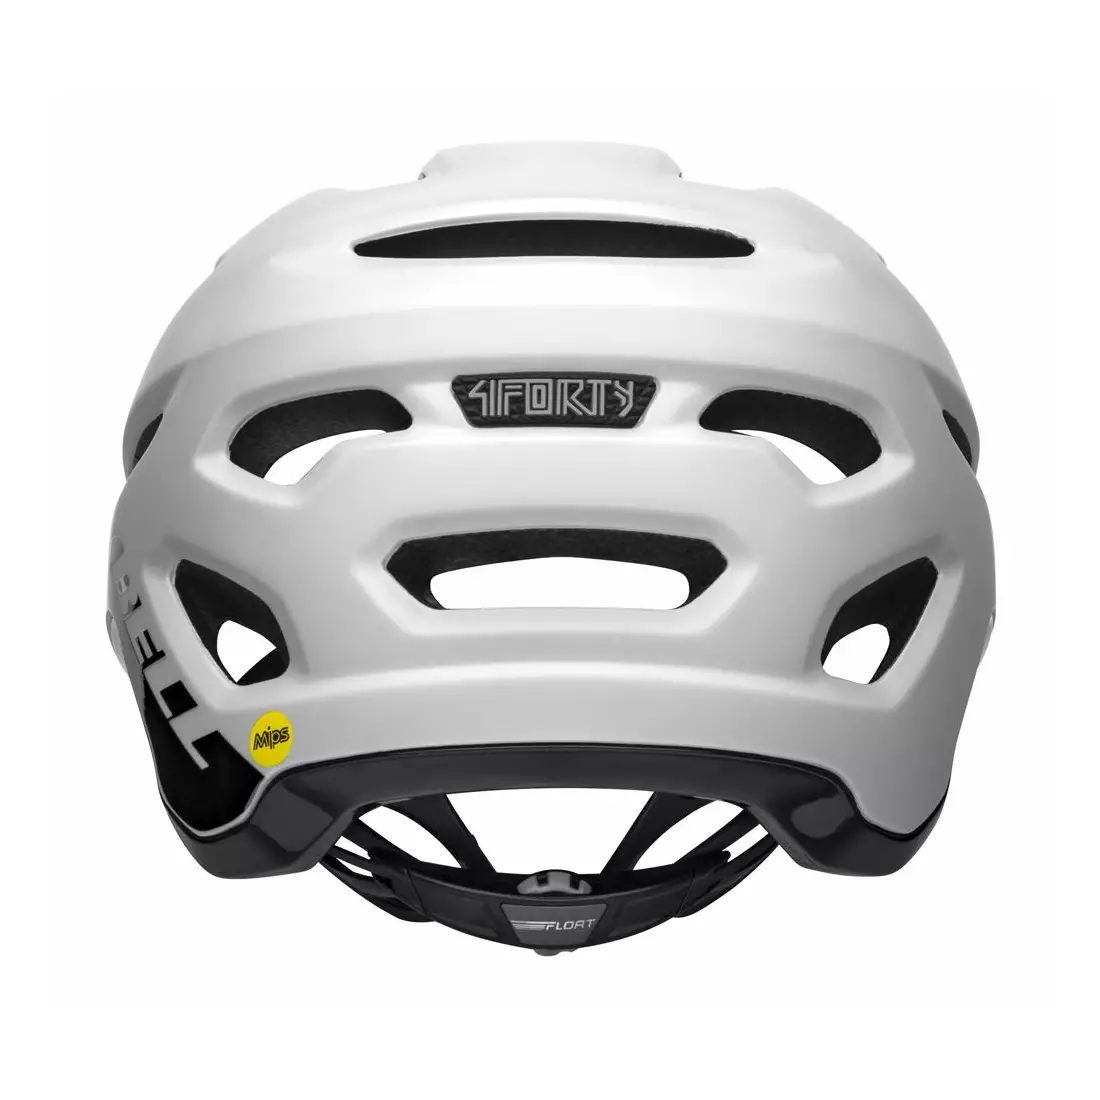 BELL kask rowerowy mtb 4FORTY INTEGRATED MIPS matte gloss white black BEL-7128982